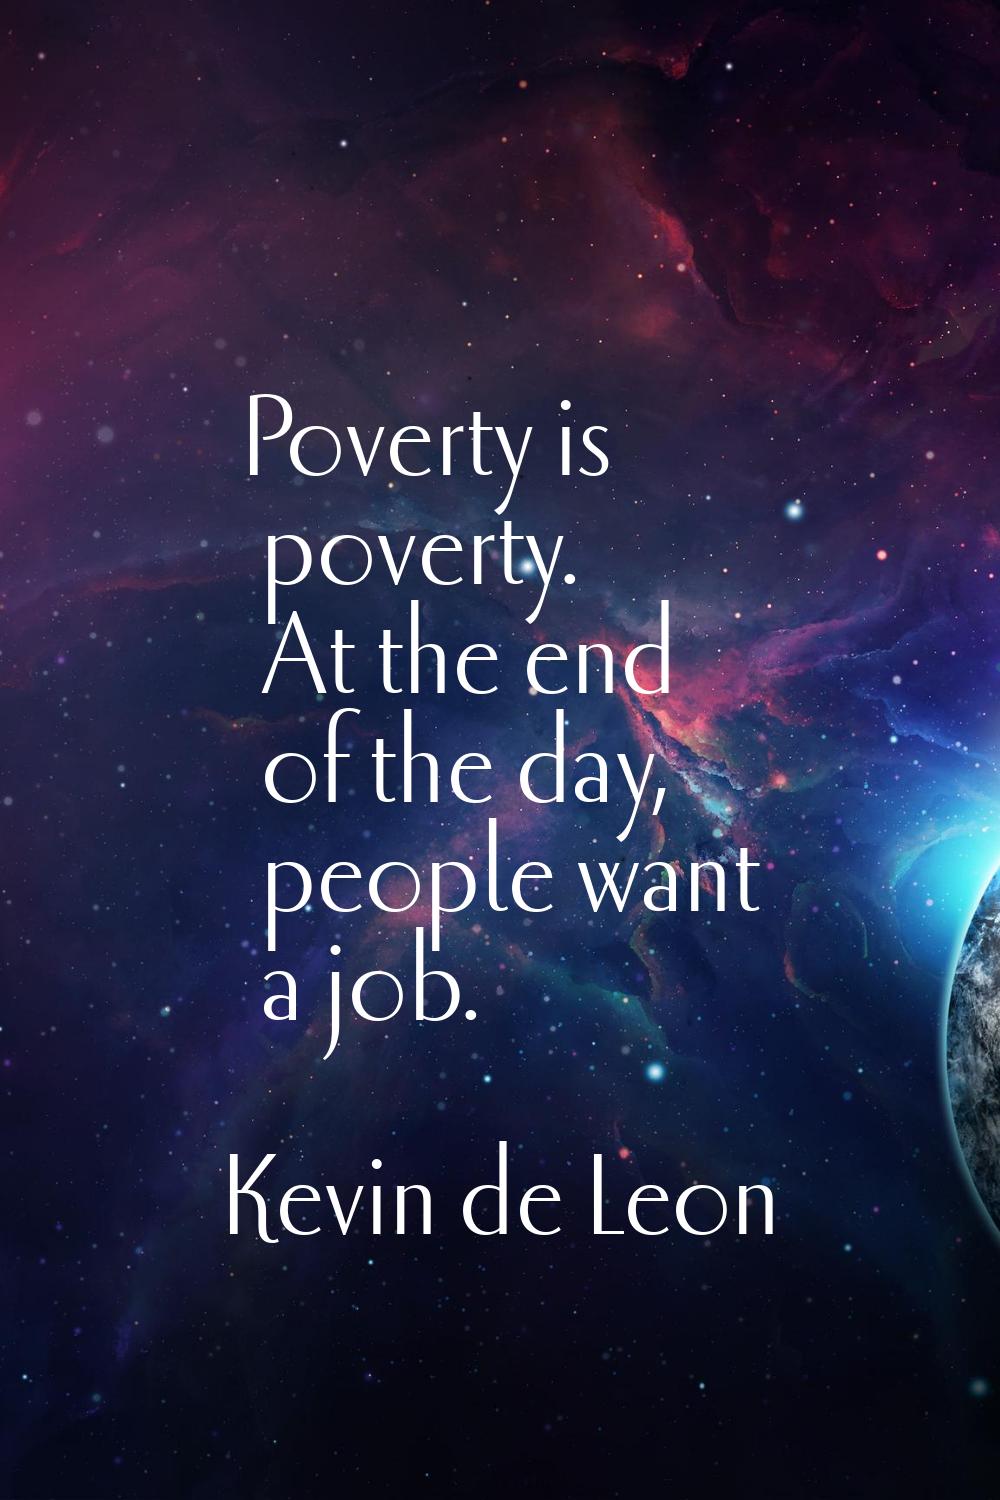 Poverty is poverty. At the end of the day, people want a job.